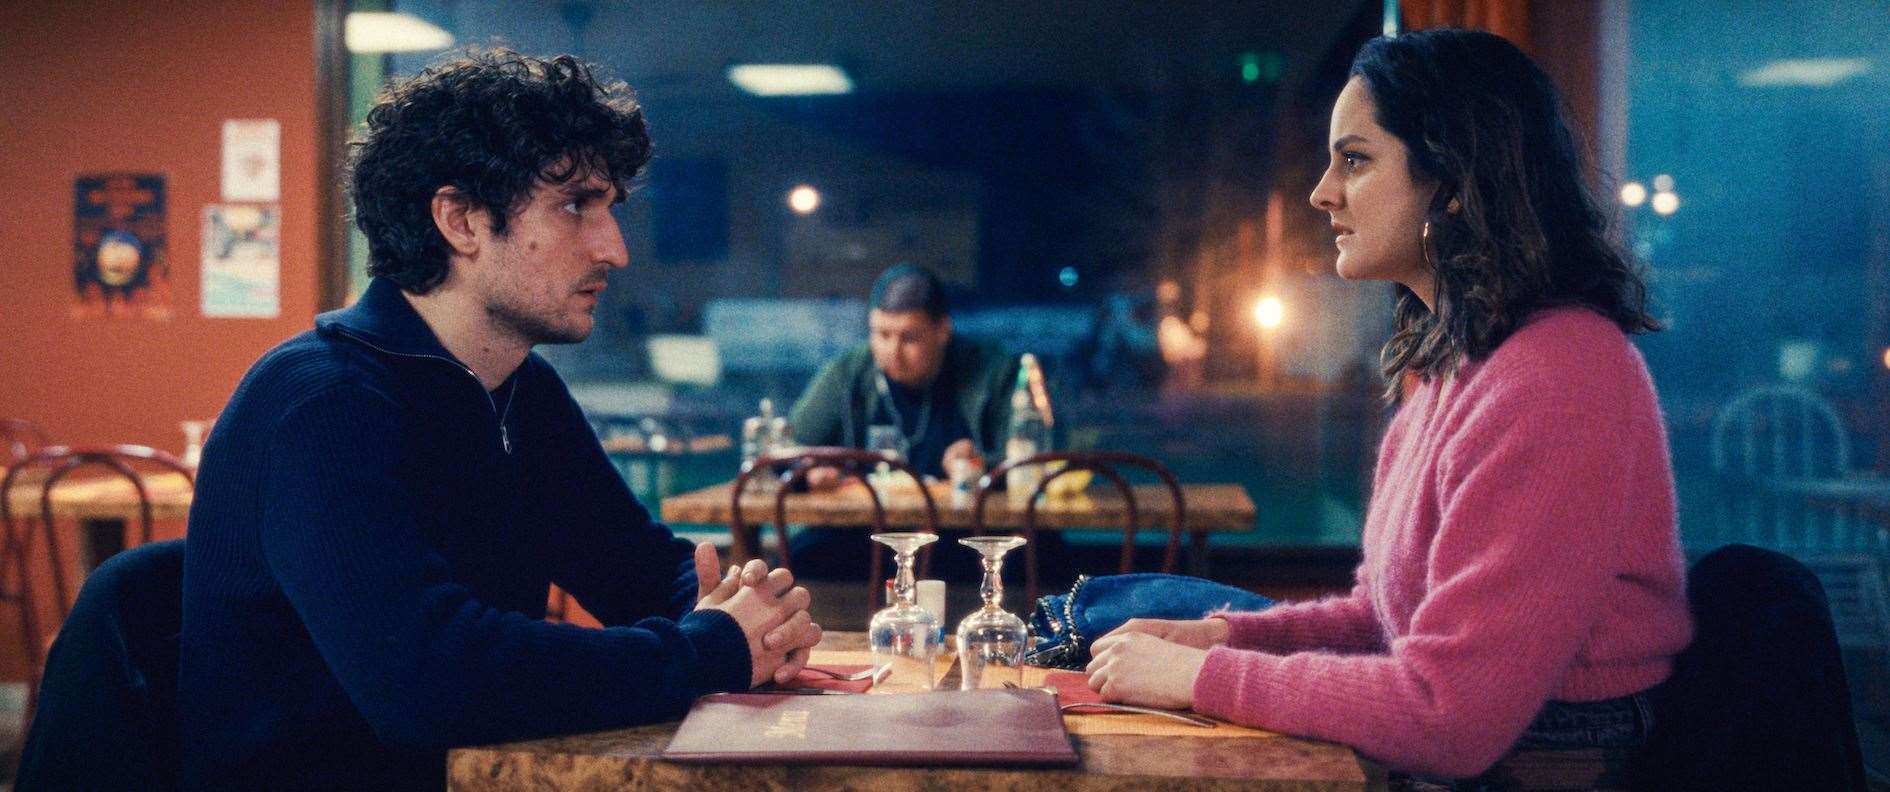 The Innocent with Louis Garrel and Noemie Merlant.